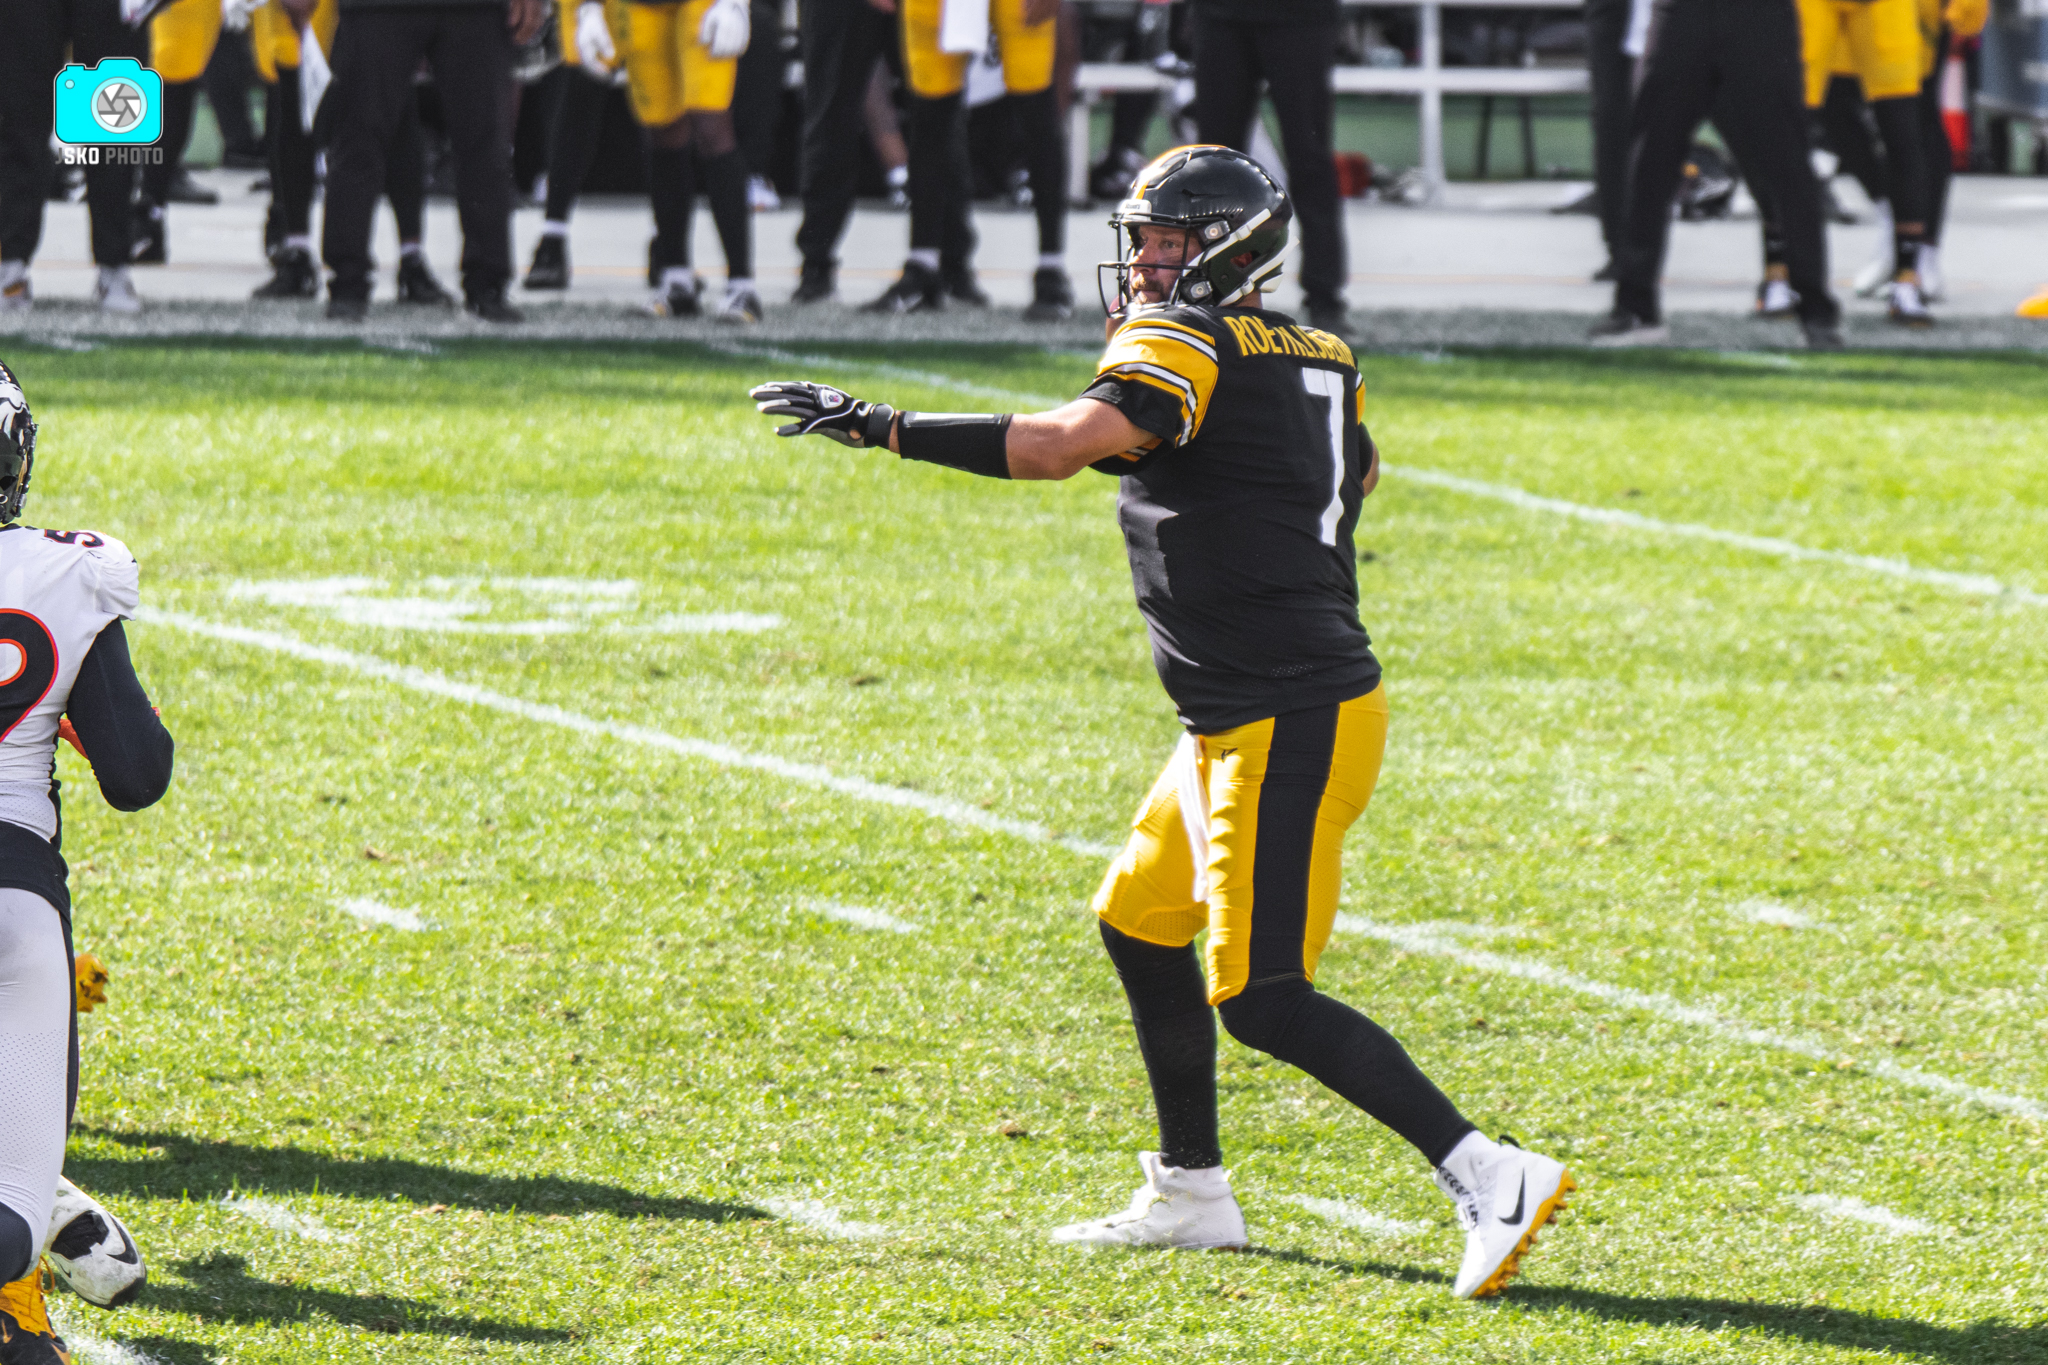 Steelers: Ben Roethlisberger says he's earned right to criticize team